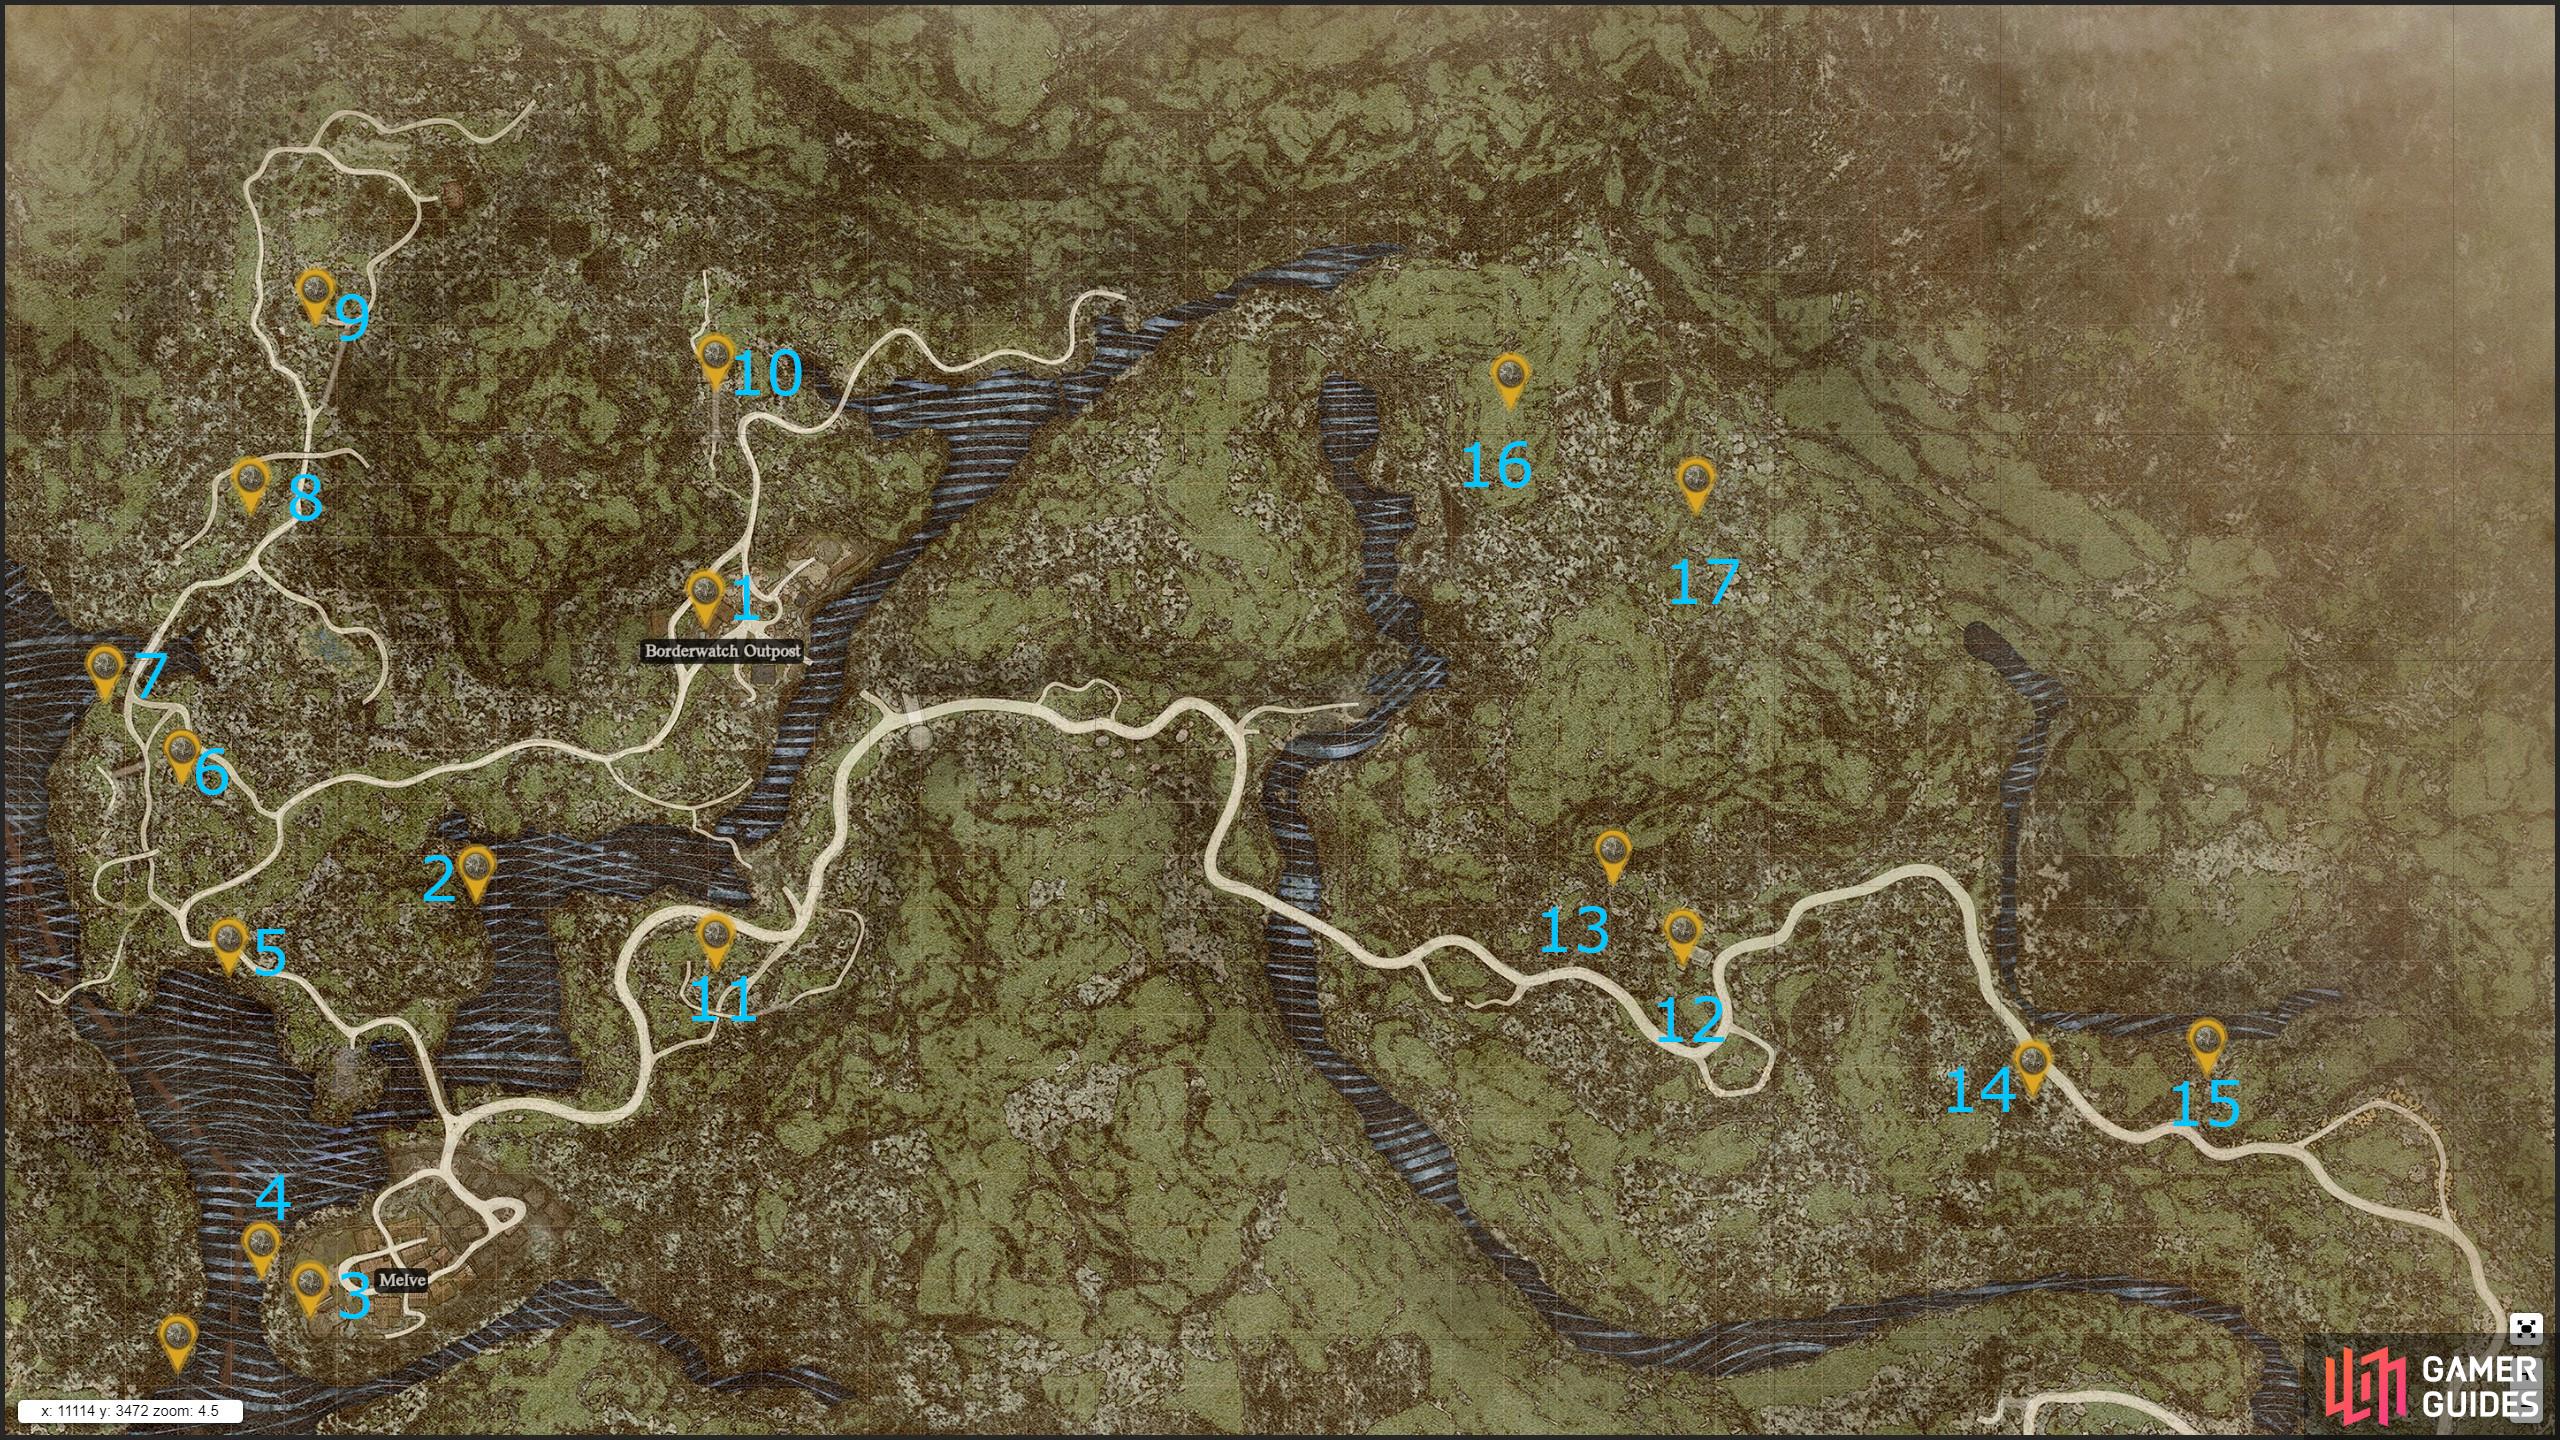 Here are all the Seeker’s Token locations in Northern Vermund that we know of.